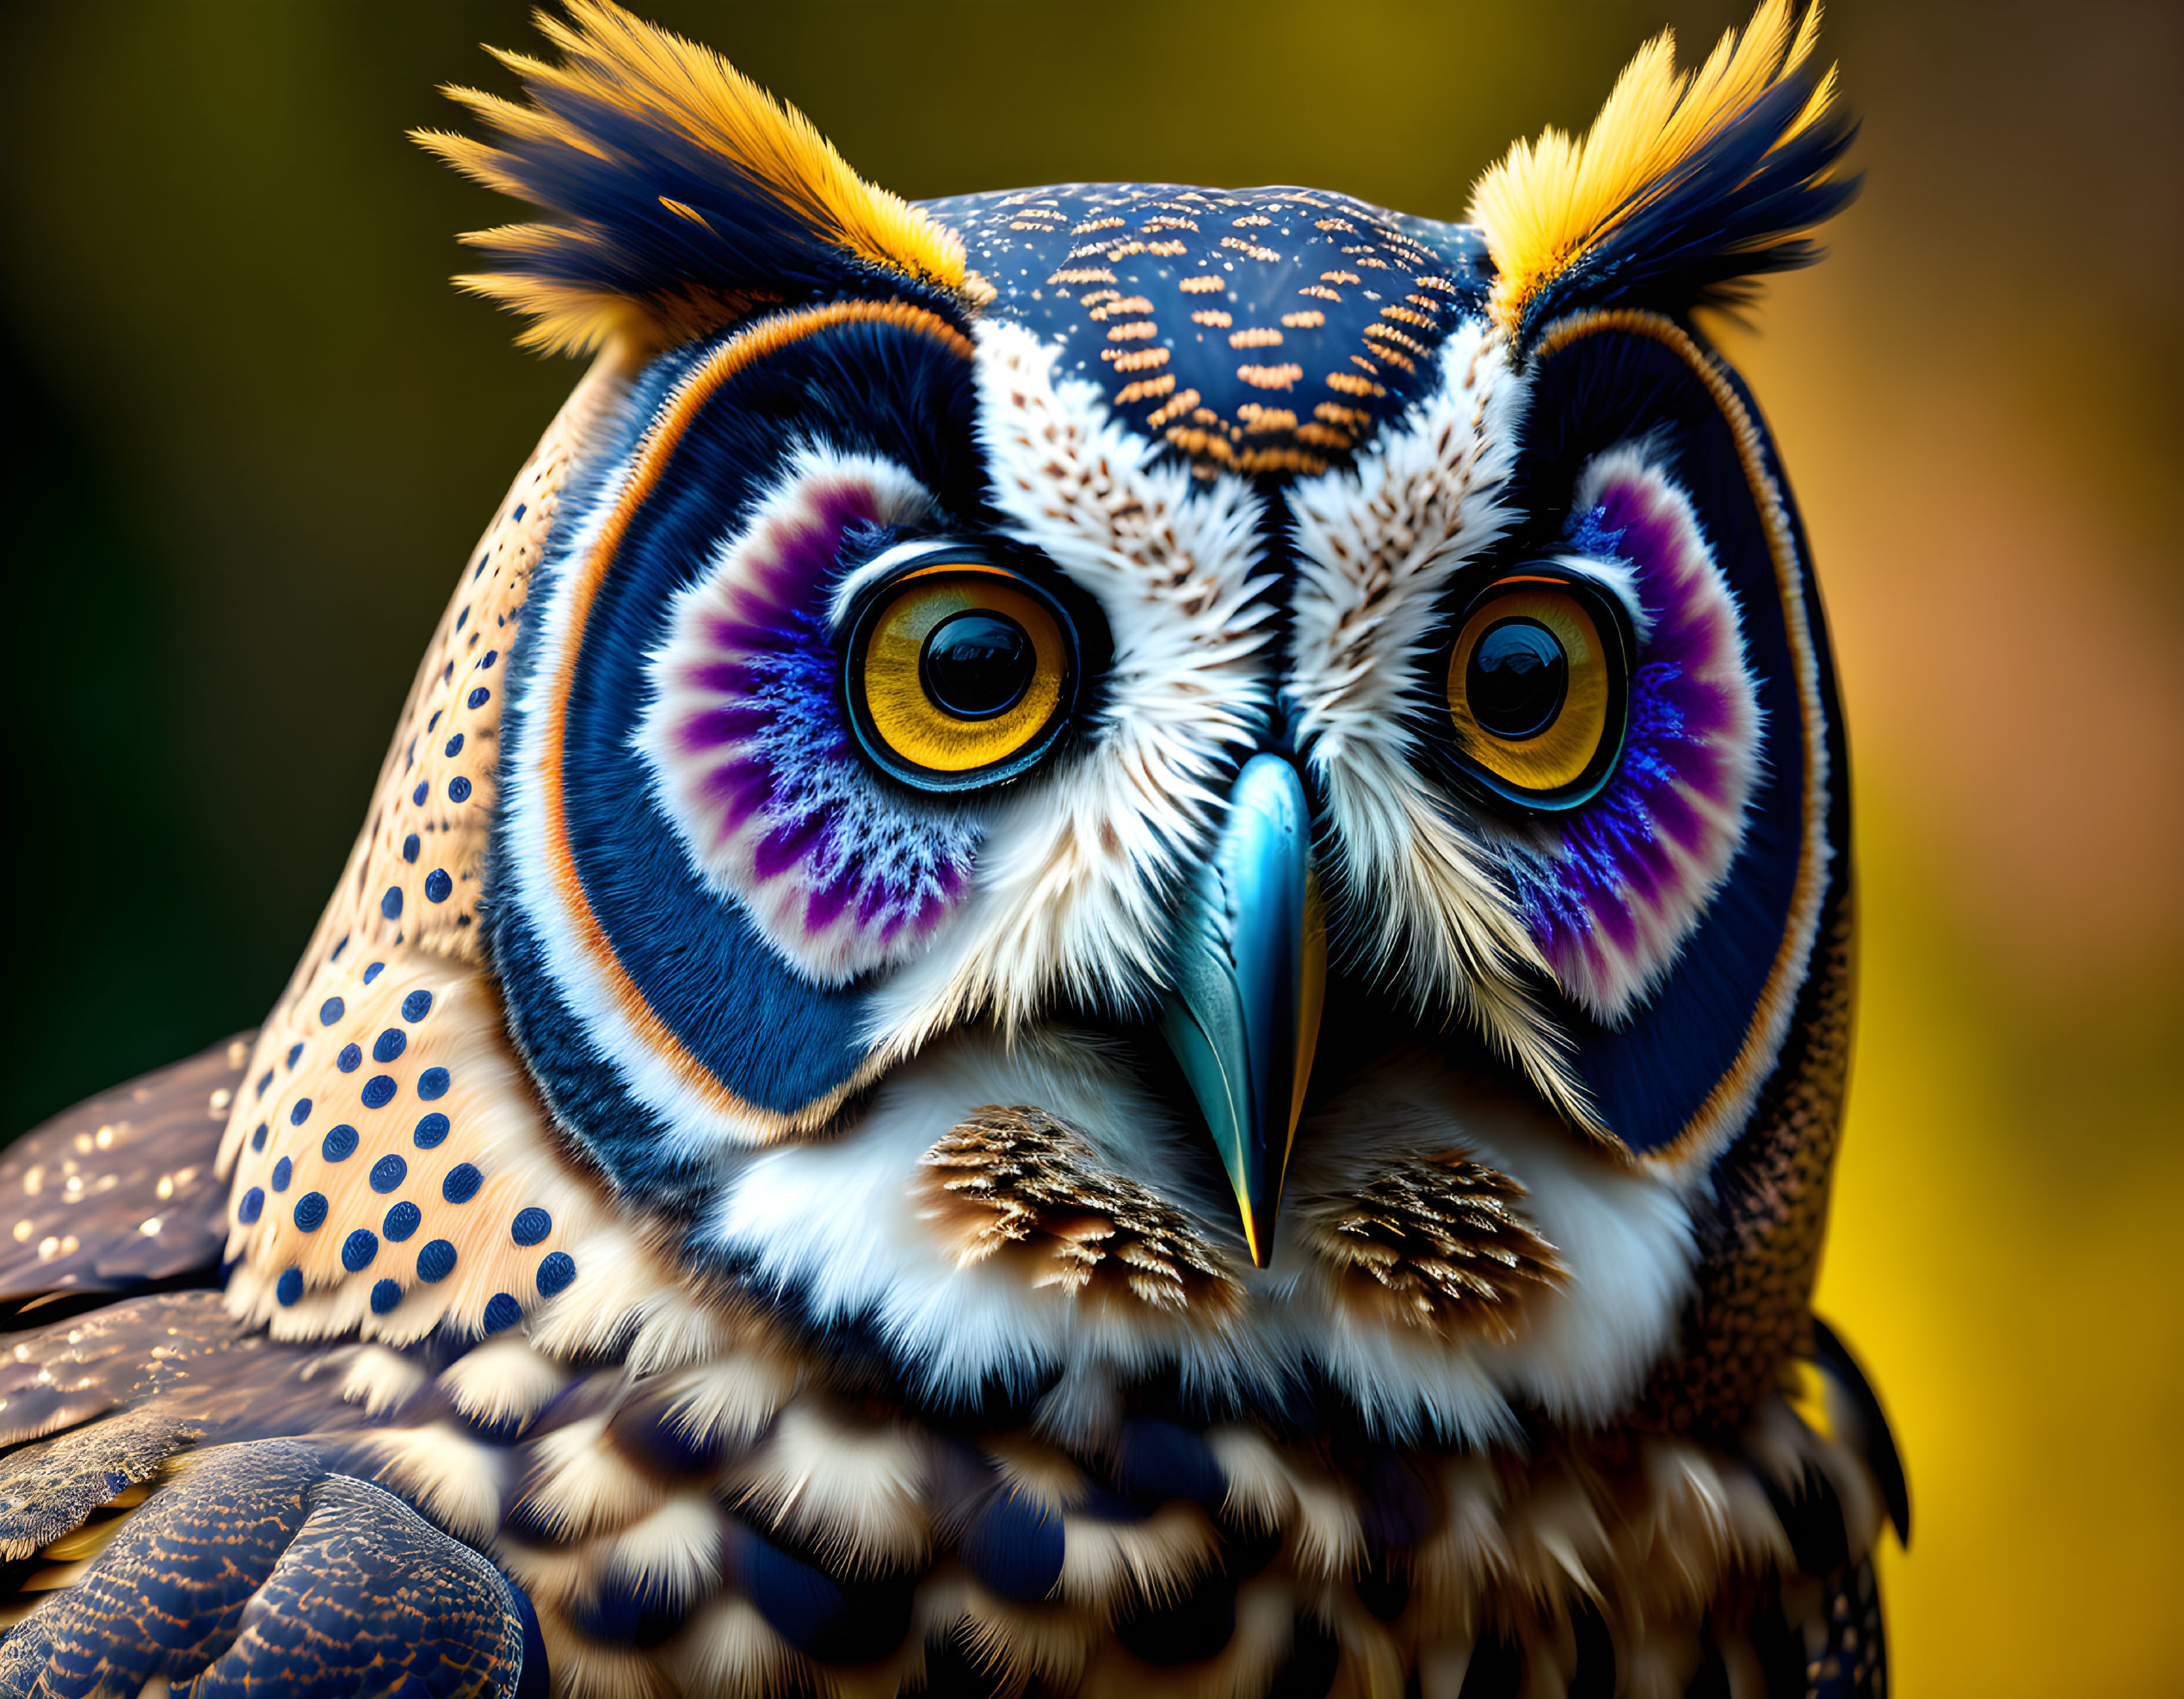 Vibrant colored owl with detailed plumage and piercing yellow eyes